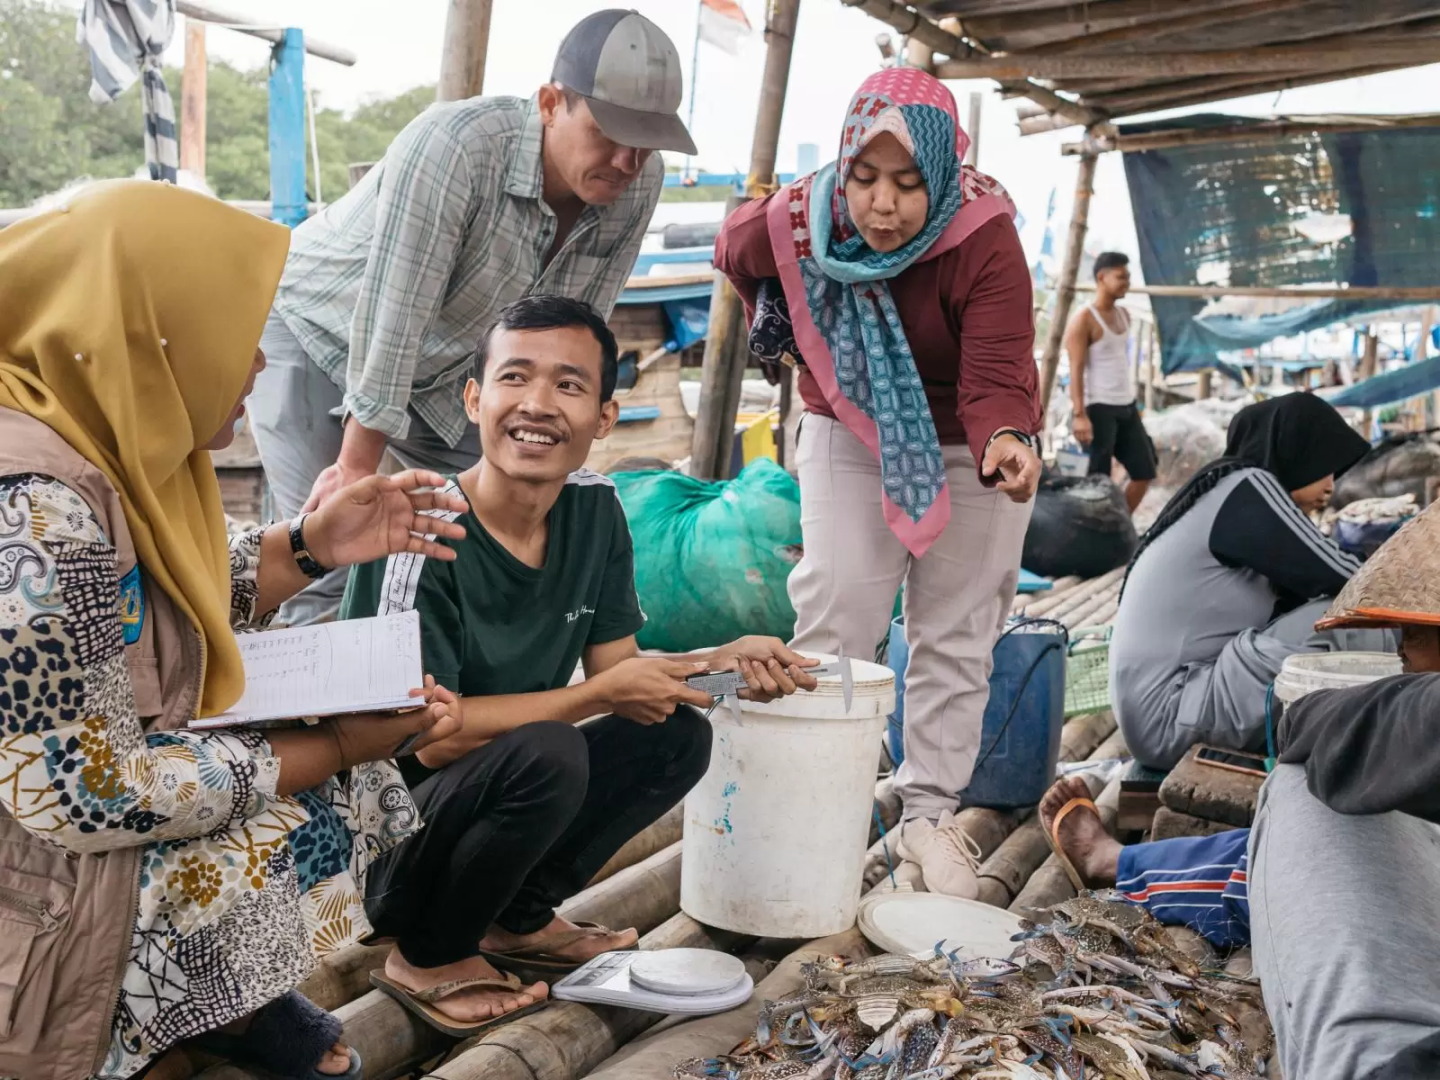 Indonesia fisheries enumerator Ayu Listiani Putri assesses the health of the blue swimming crab fishery in Lampung Province with other people standing around